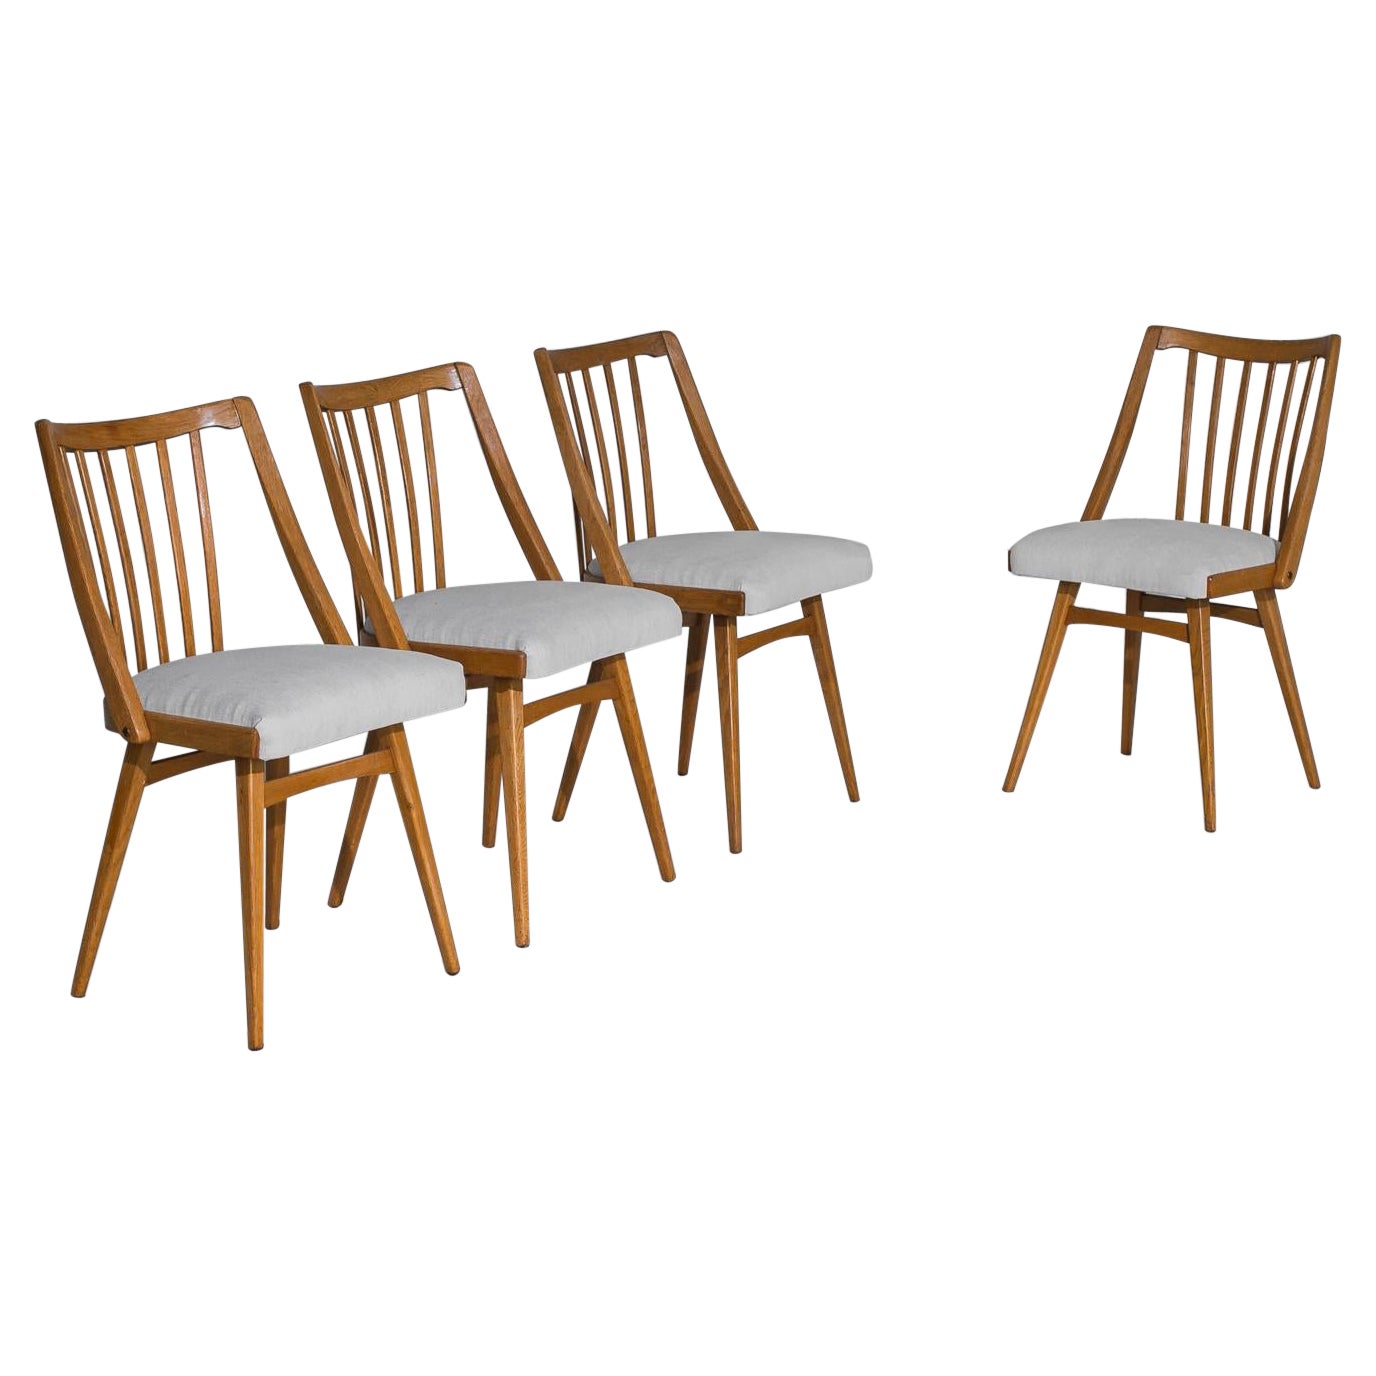 1960s Czechoslovakian Upholstered Wooden Chairs, Set of Four